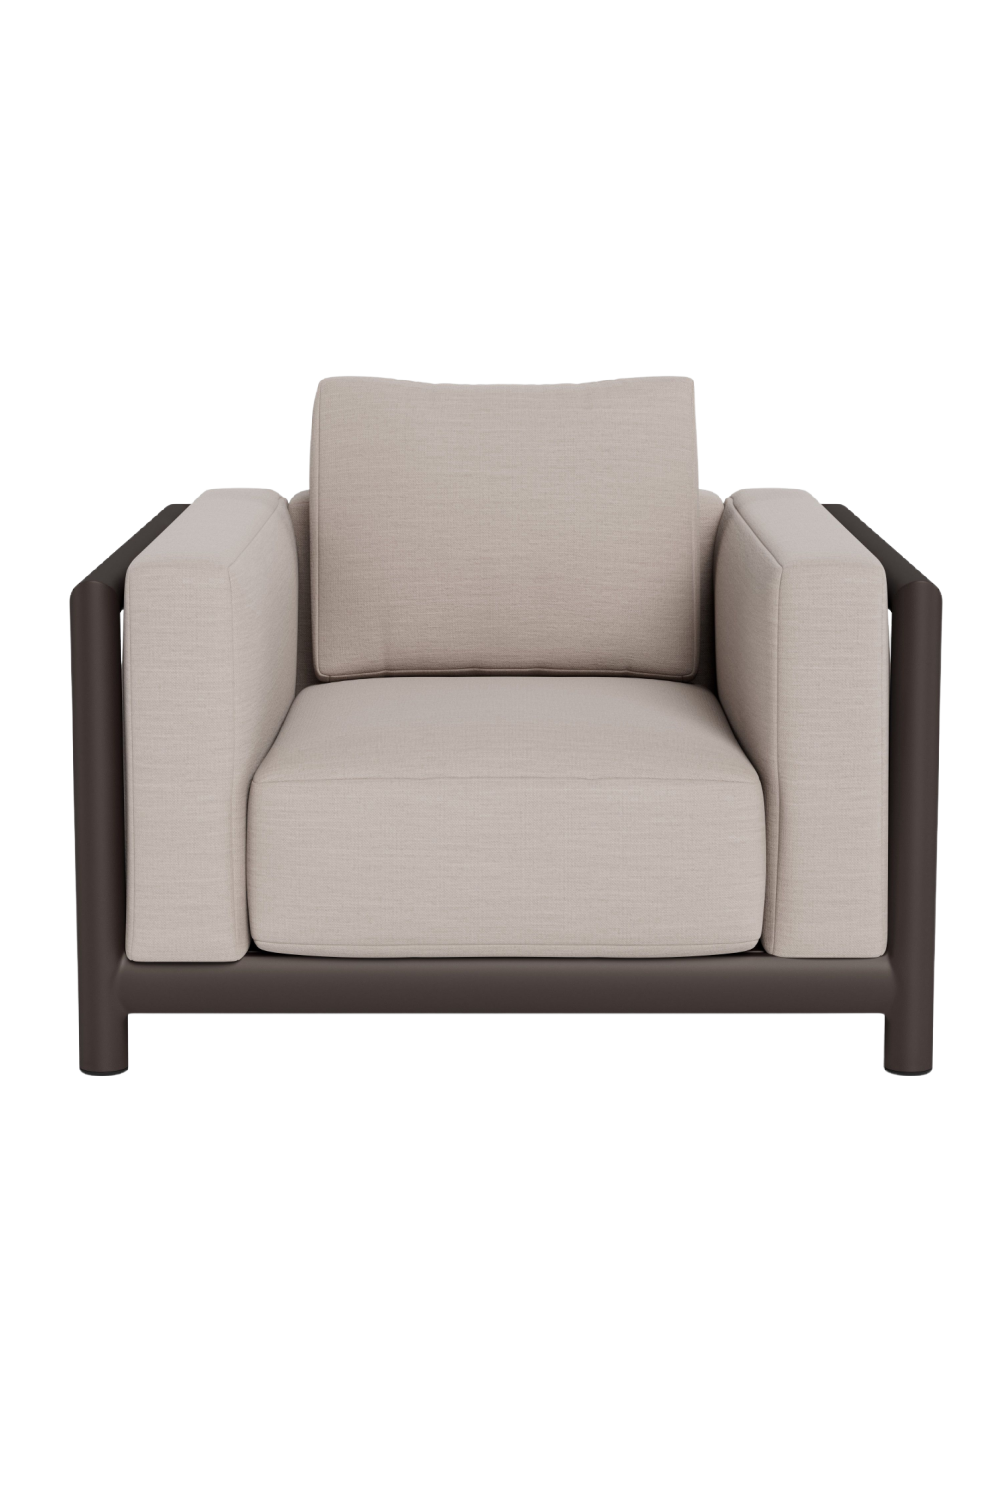 Taupe Outdoor Lounge Chair | Andrew Martin Cayman | Oroa.com